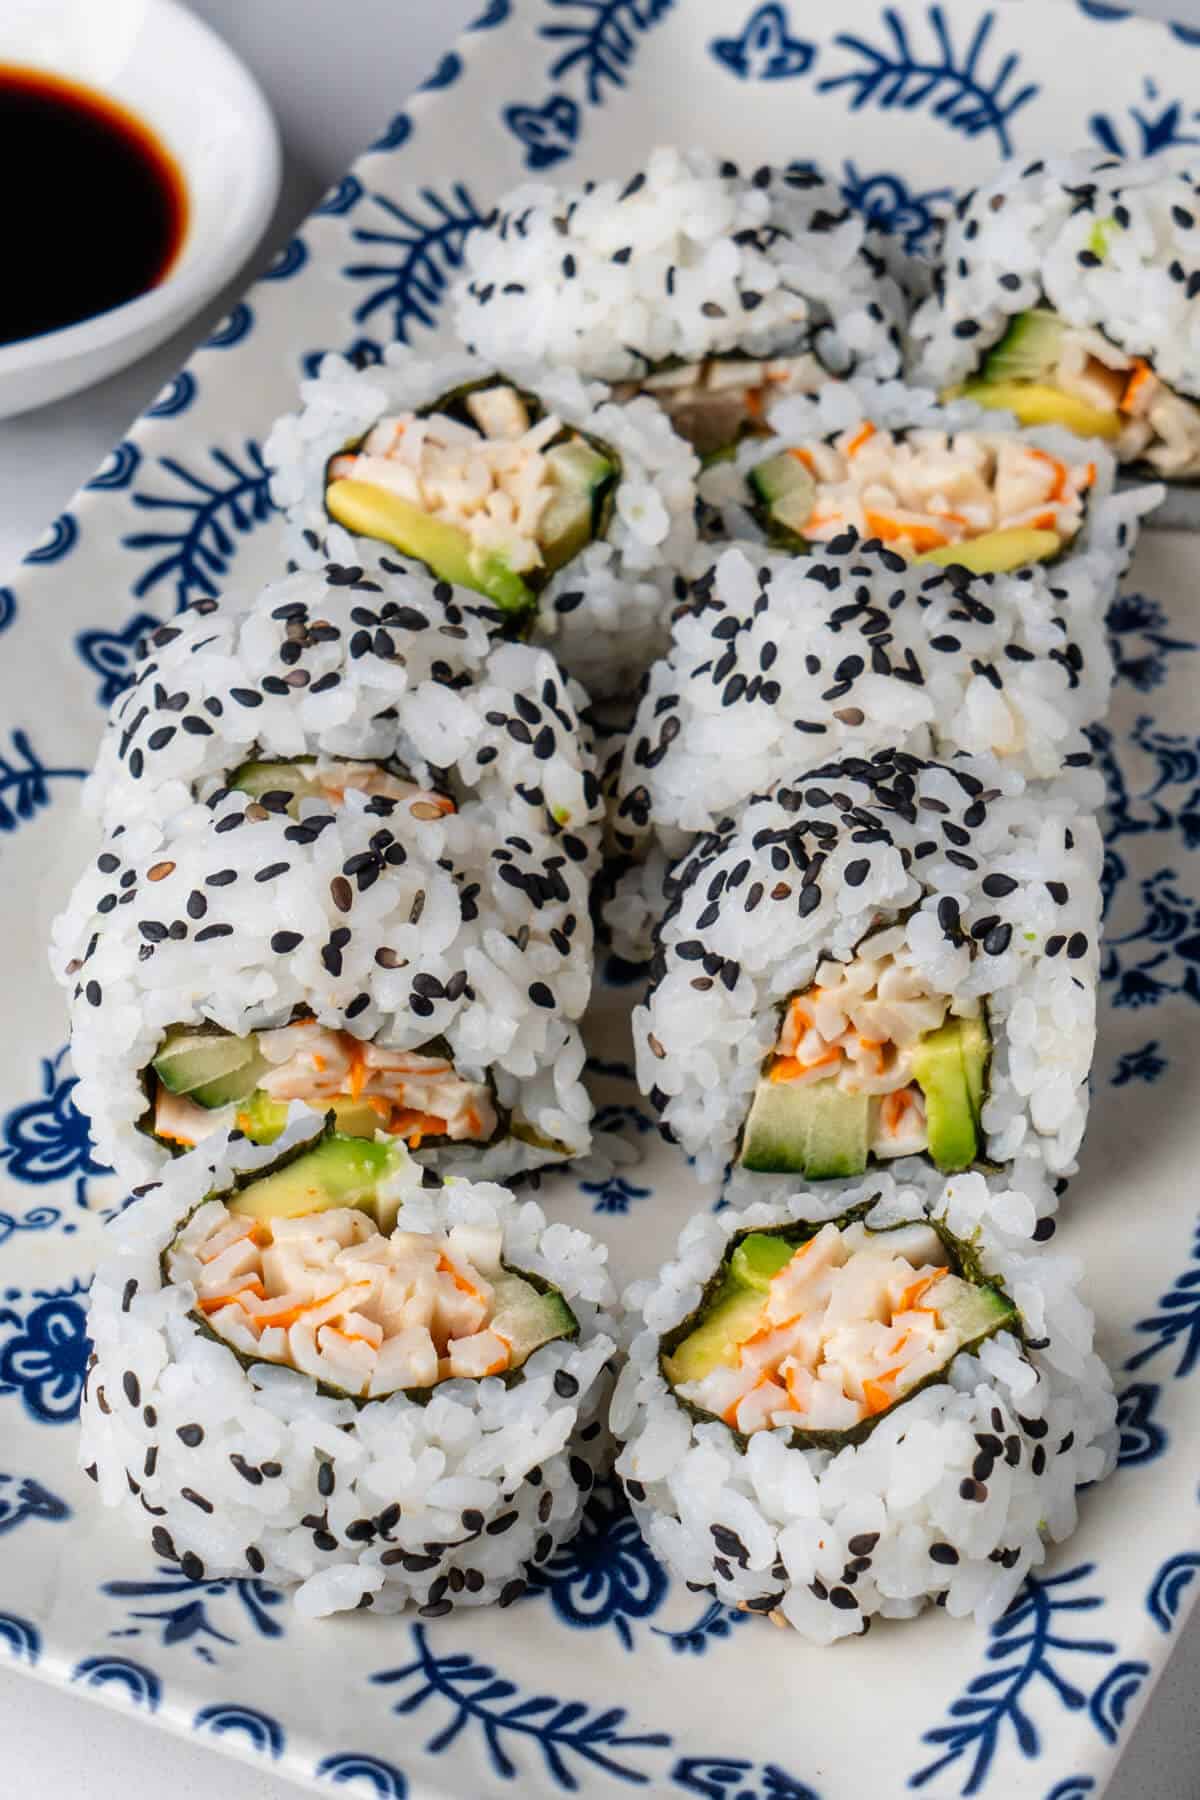 Kani Sushi pieces topped with black sesame